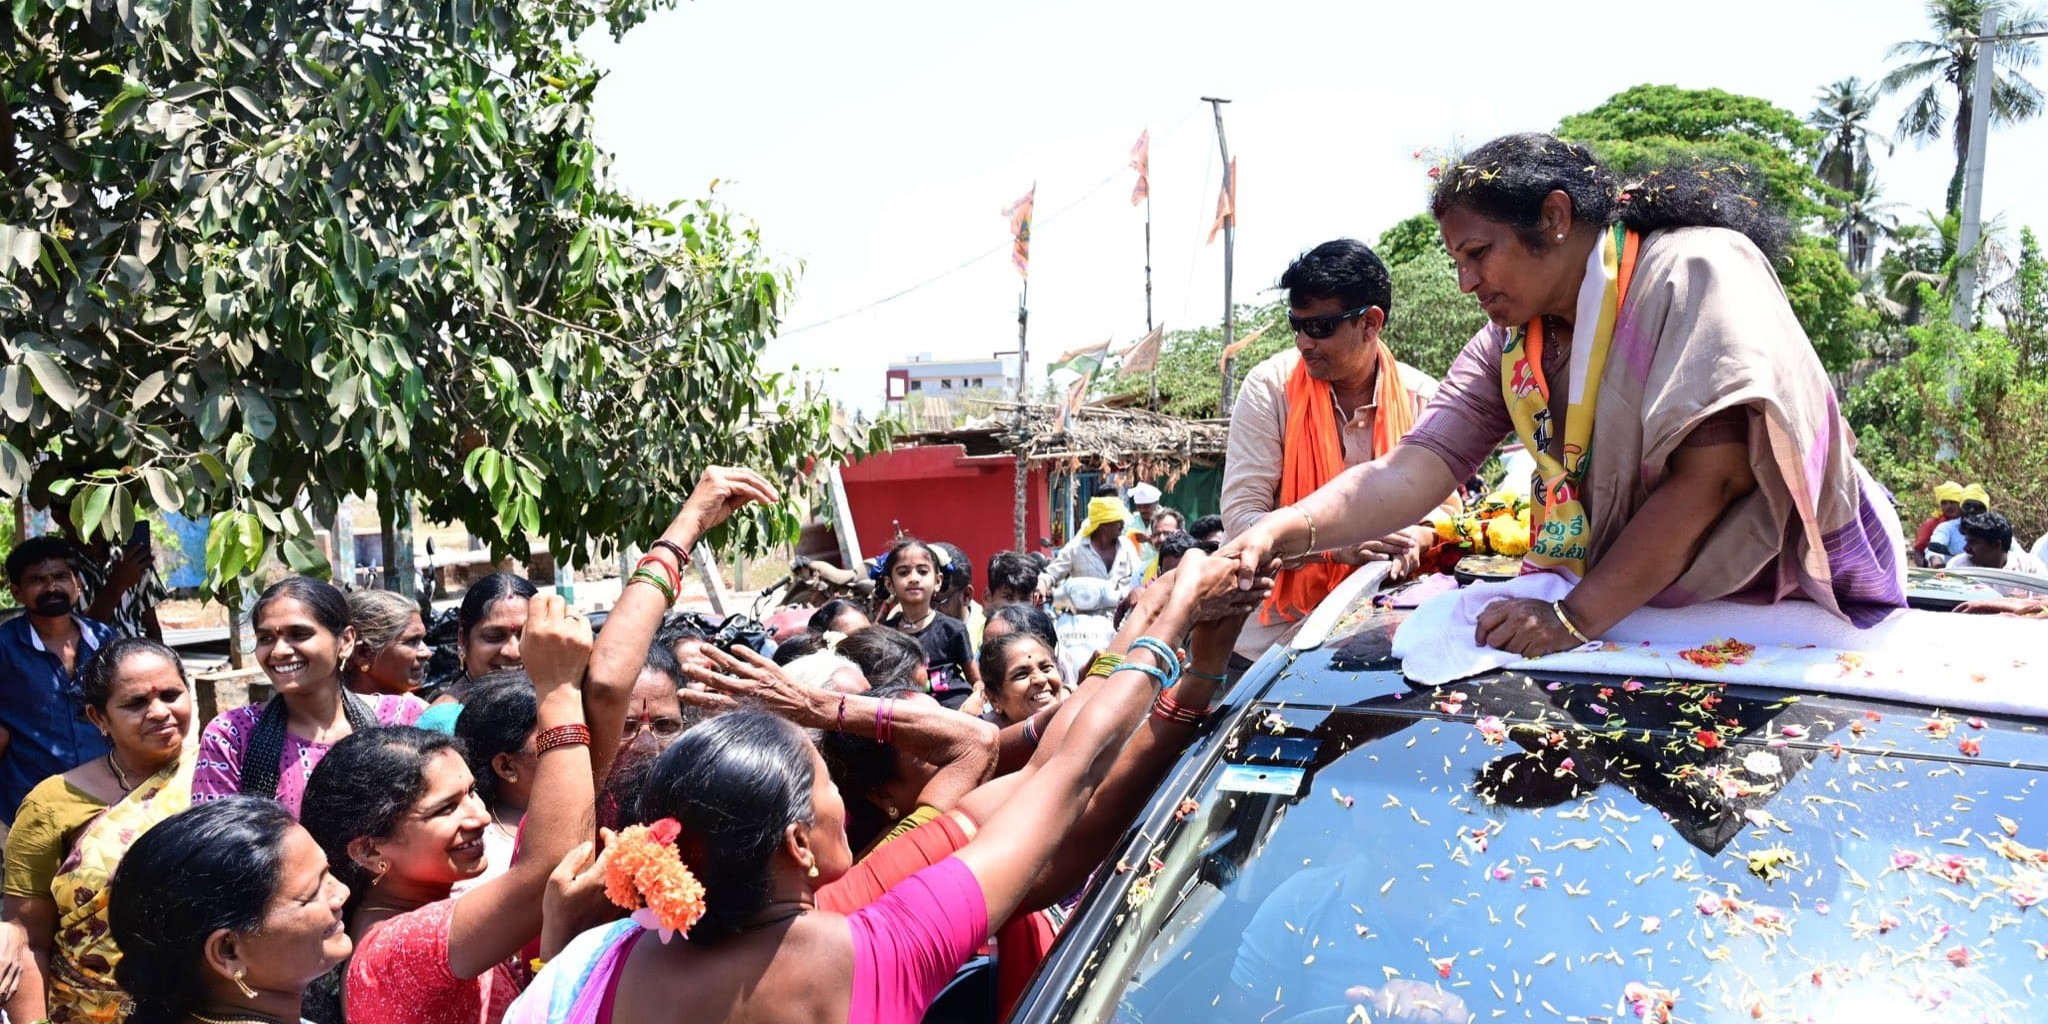 The Andhra BJP chief Purandeswari on her campaign trail in Rajahmundry. (Supplied)